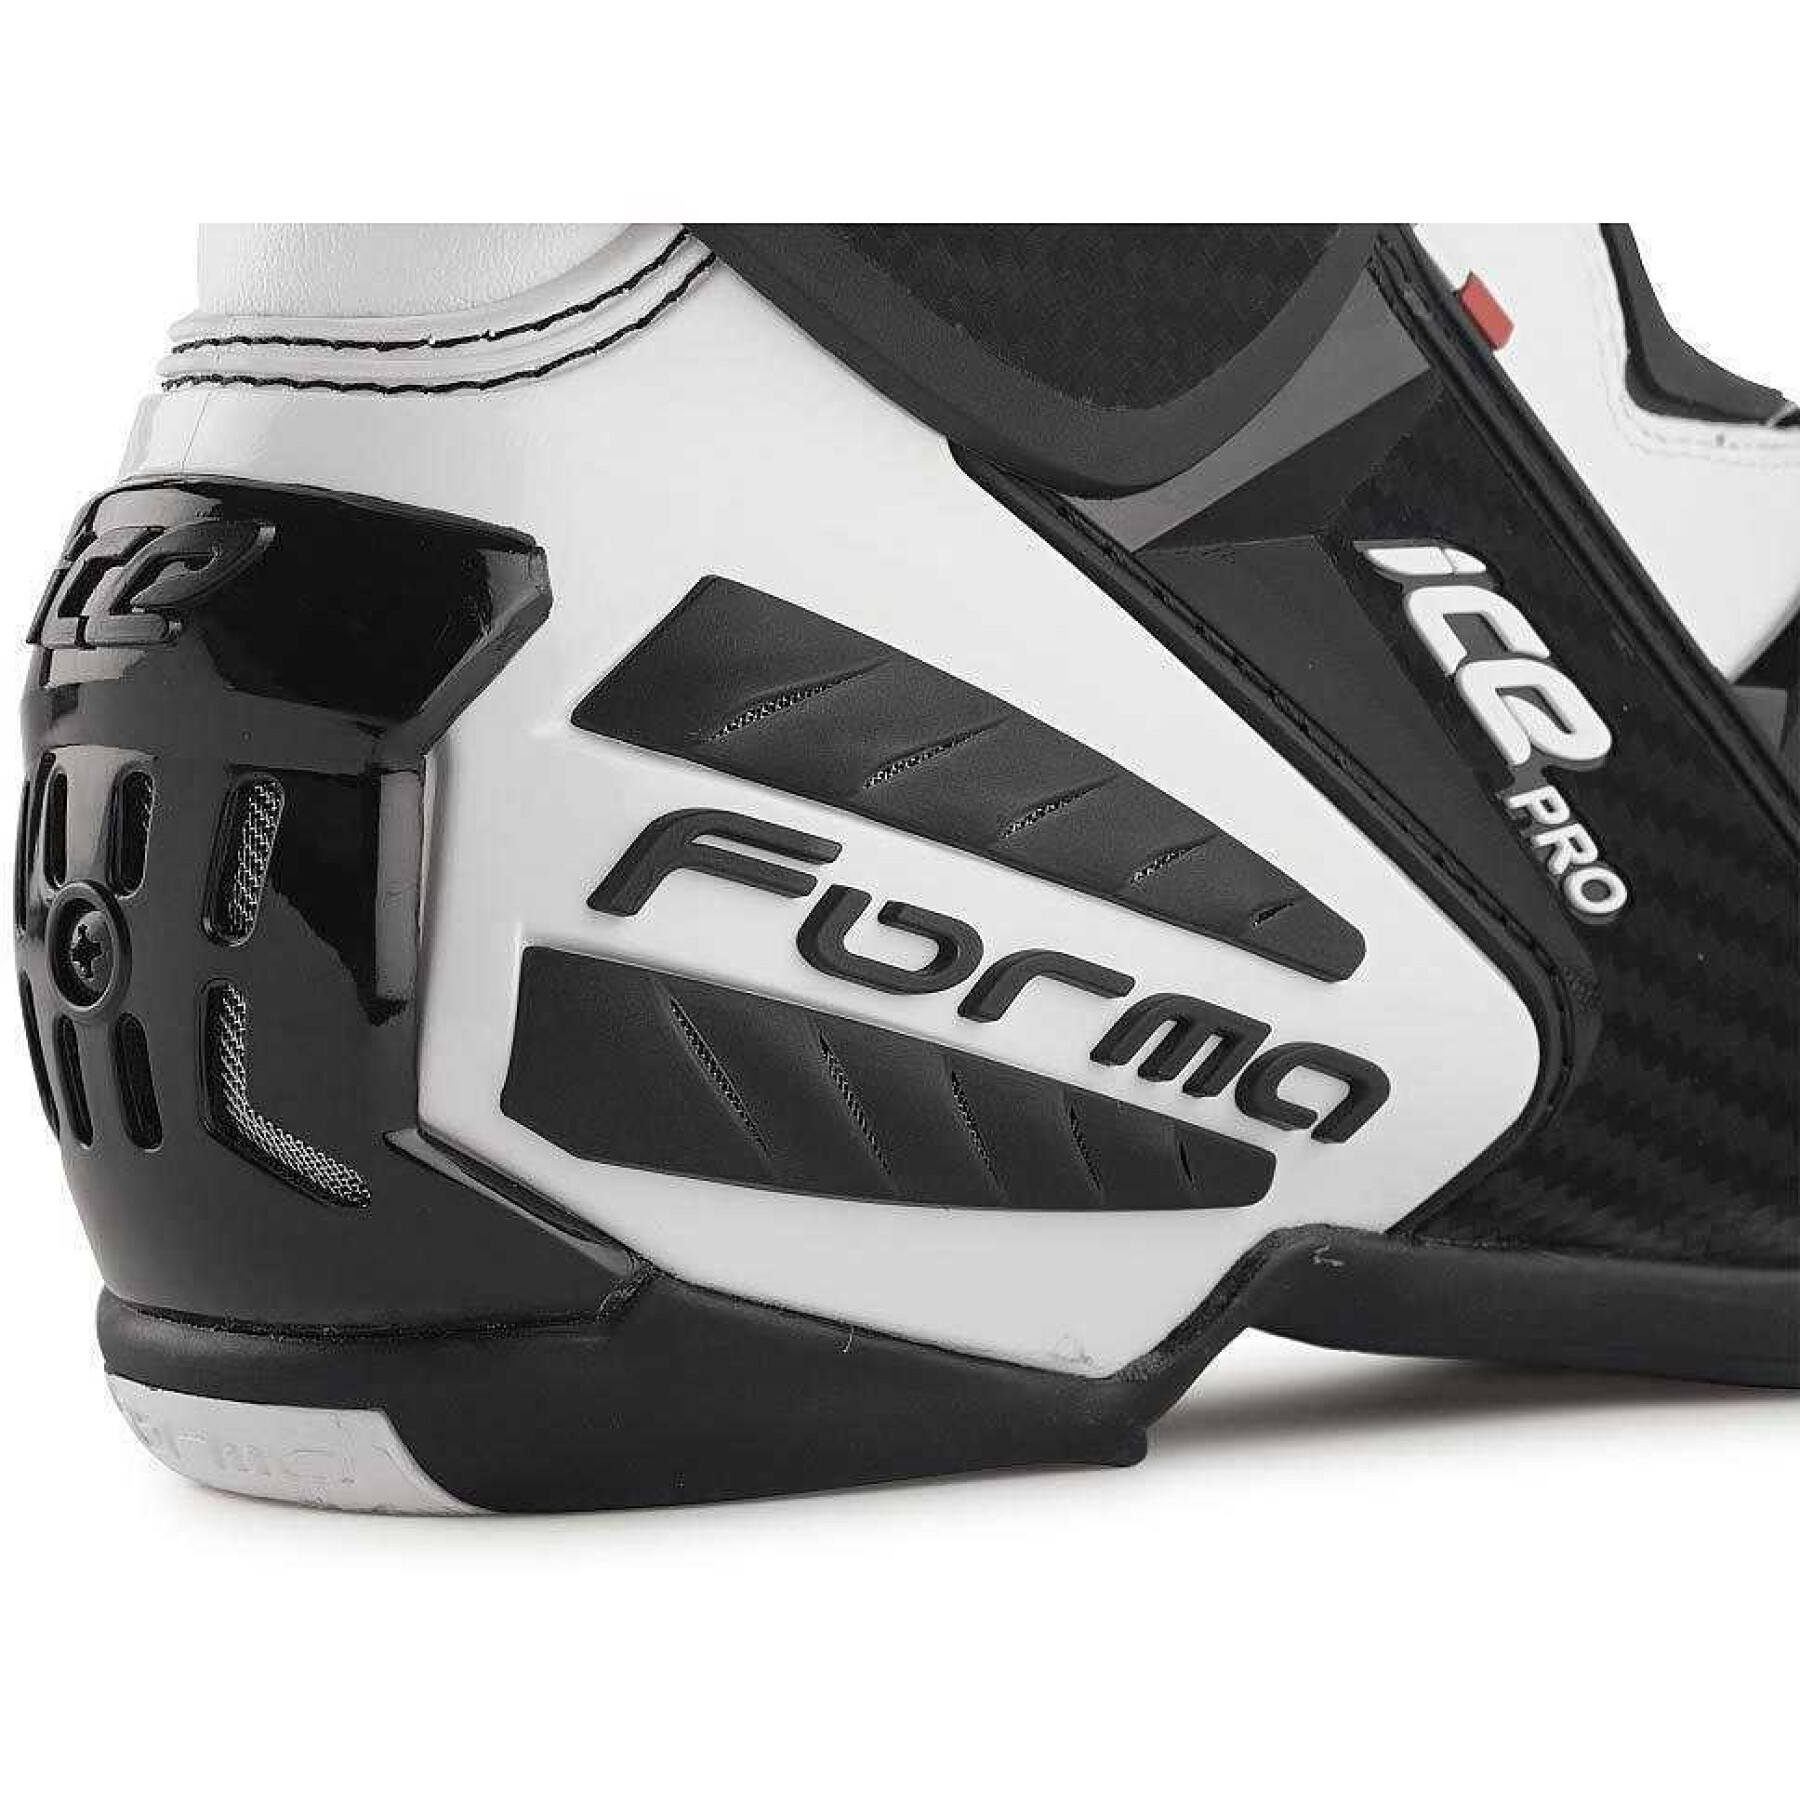 Homologated motorcycle boots Forma ice pro